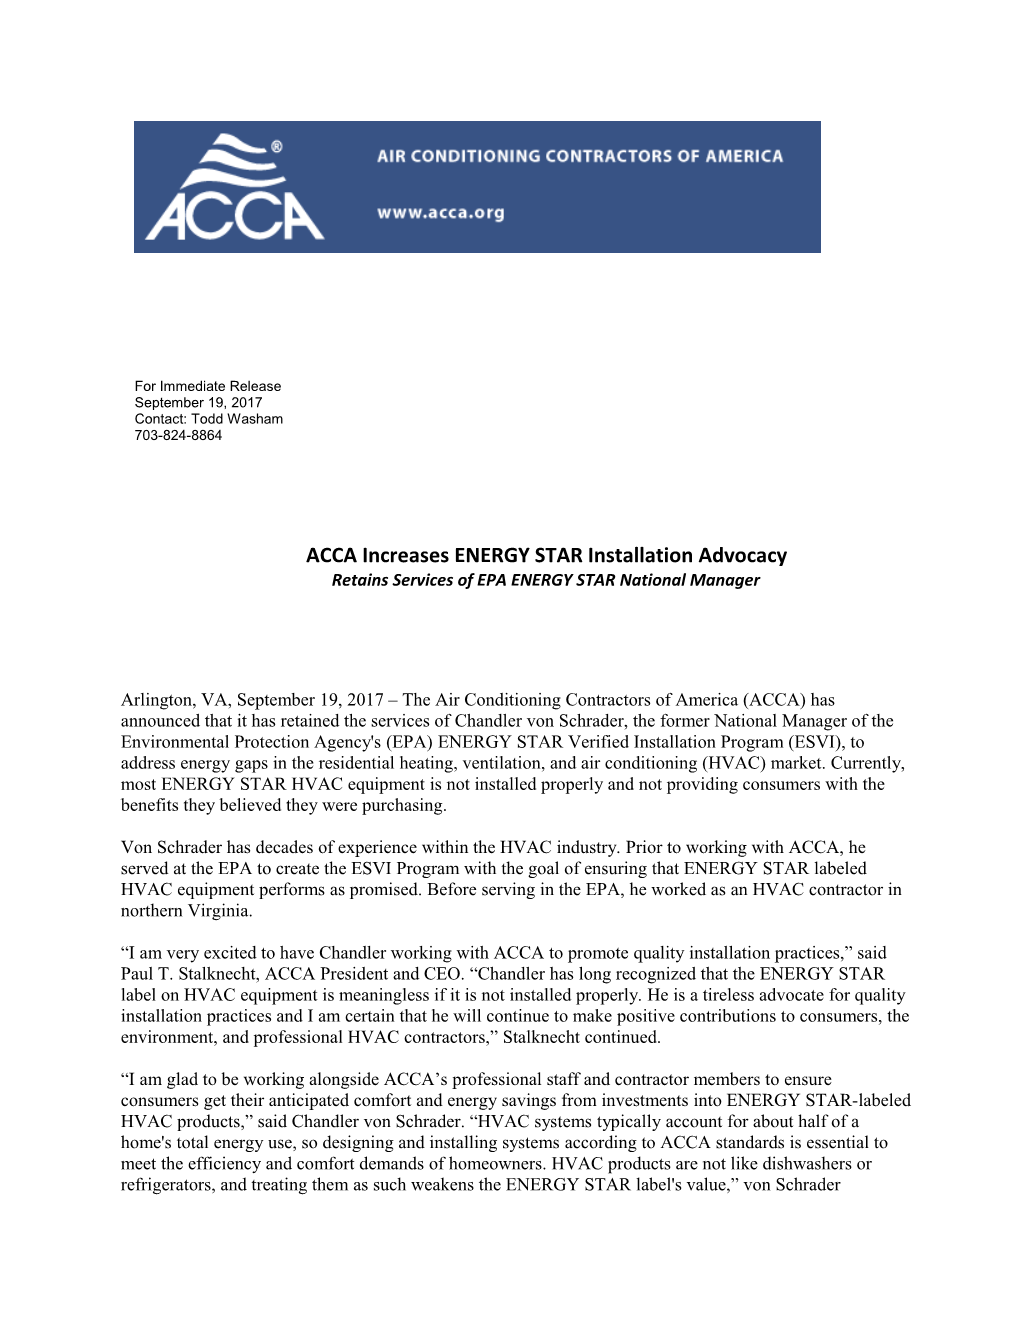 ACCA Increases ENERGY STAR Installation Advocacy